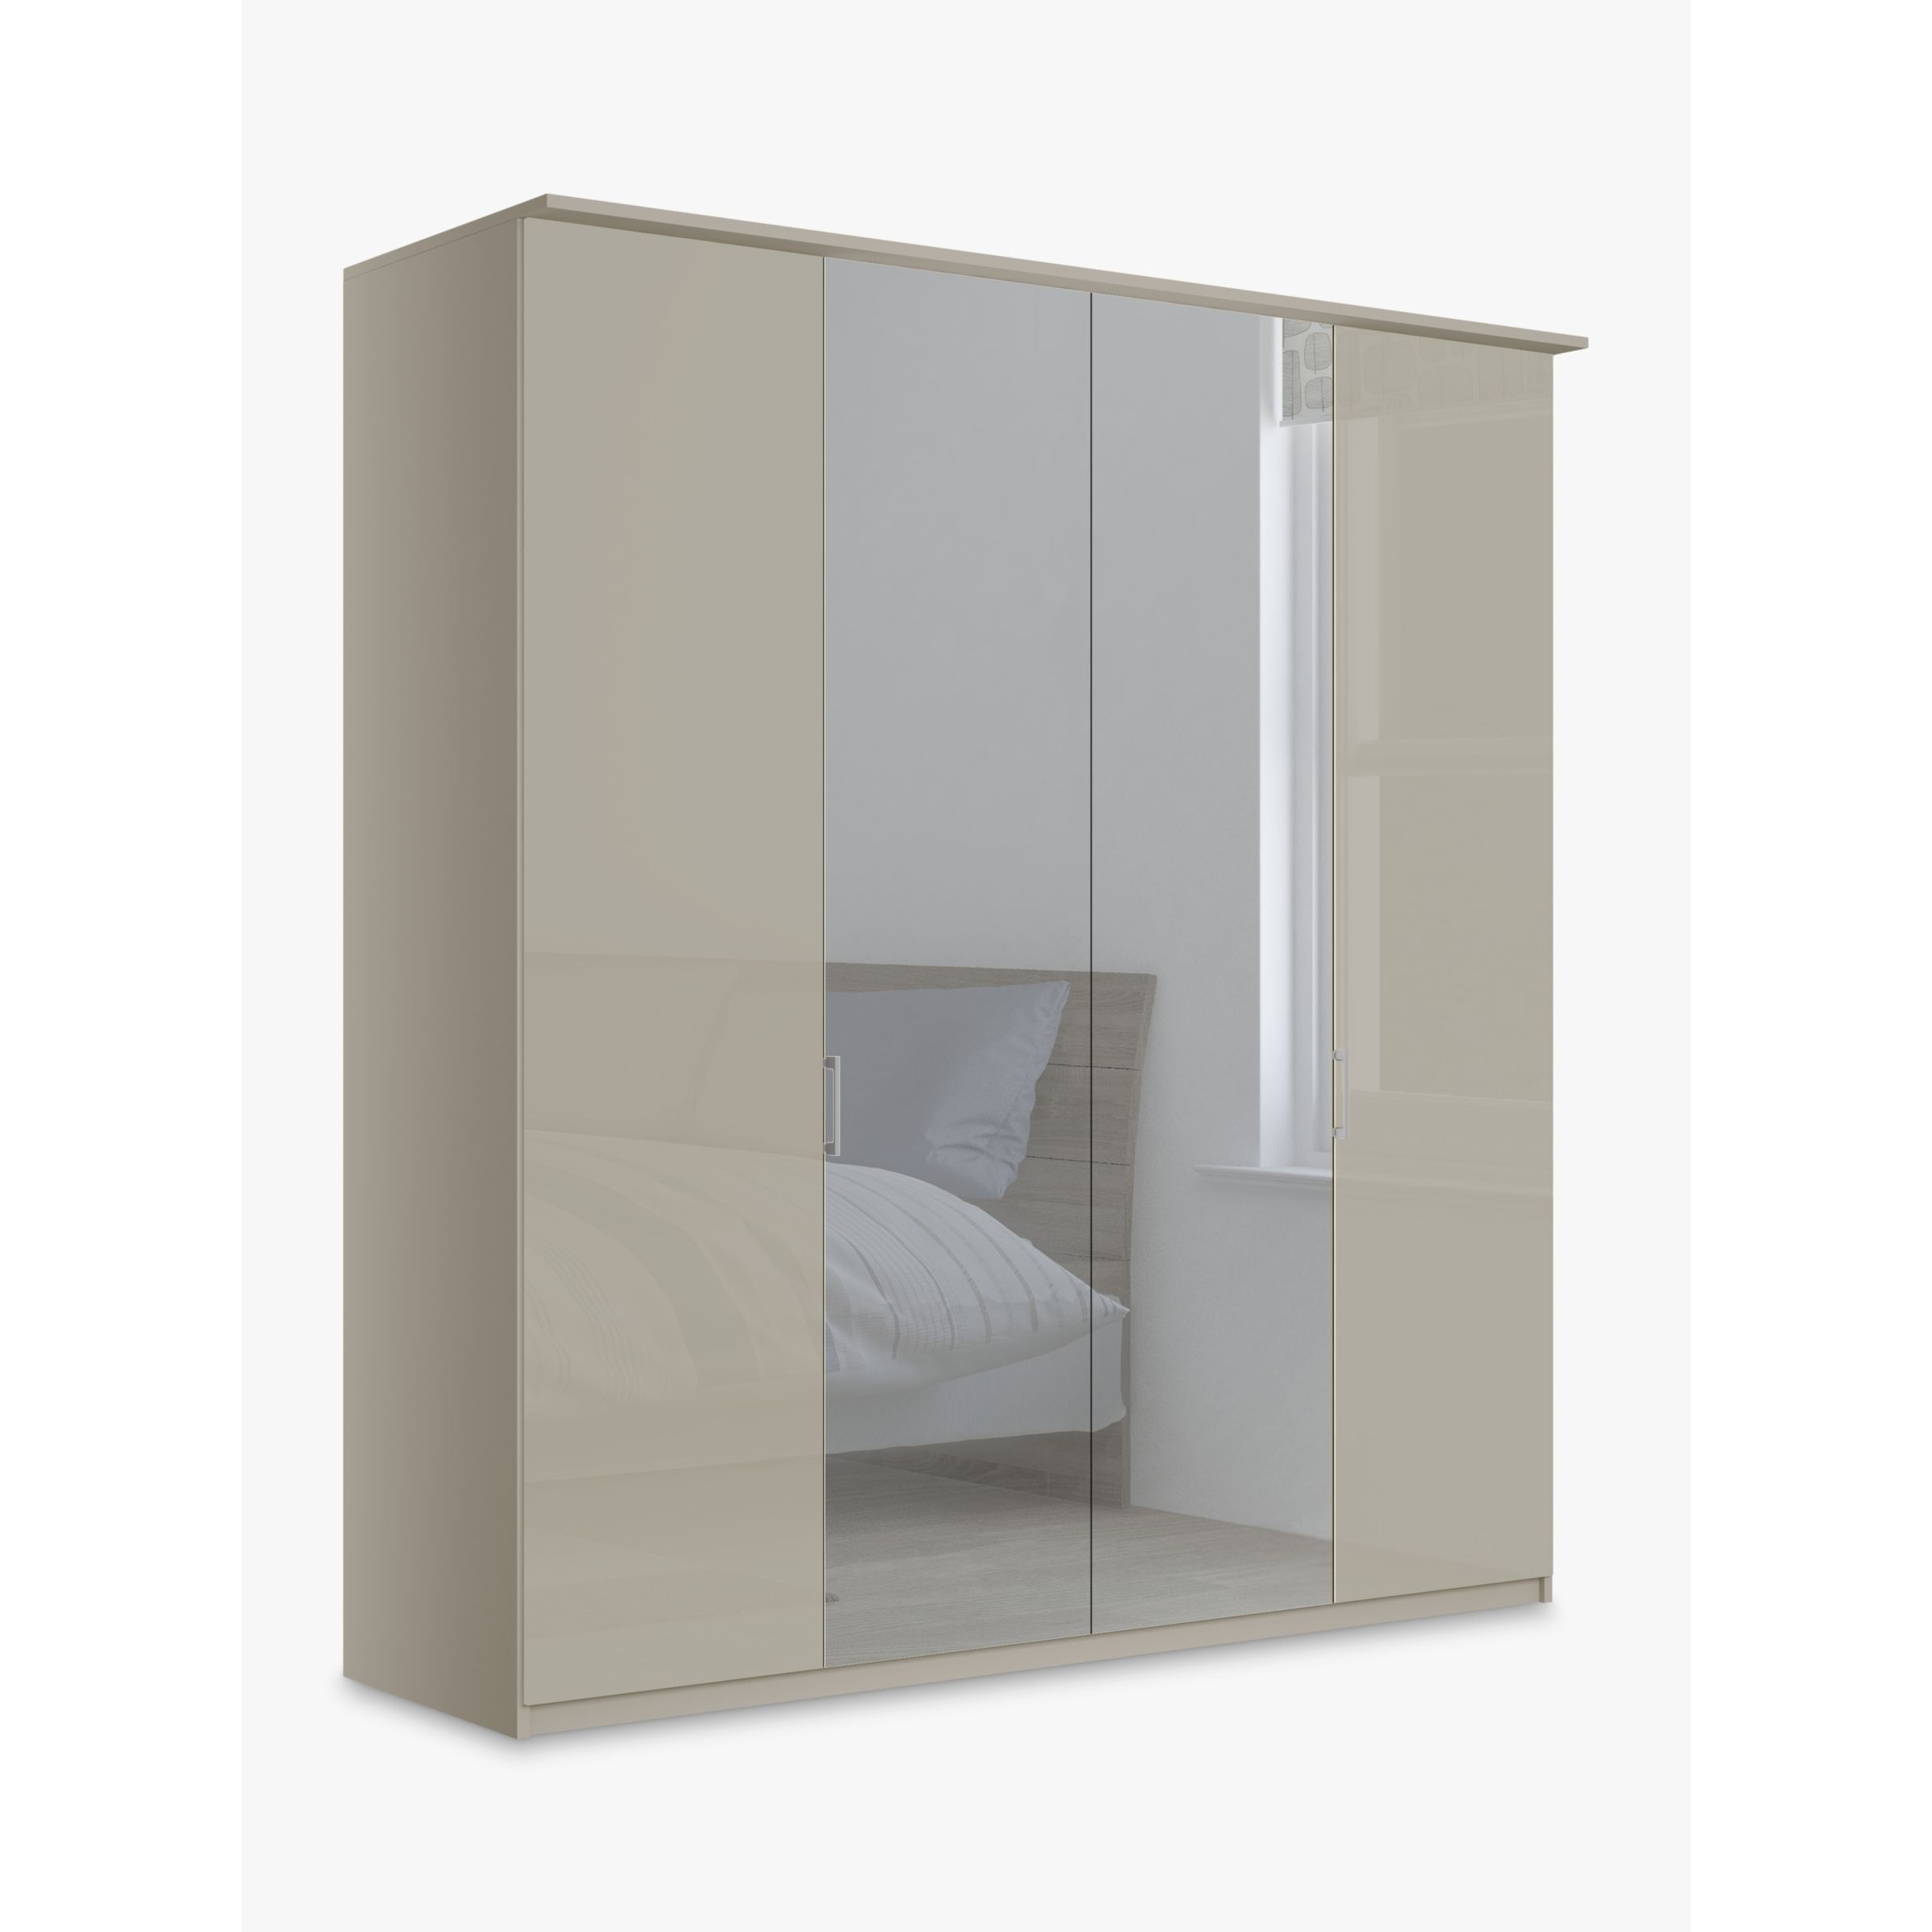 John Lewis Elstra 200cm Wardrobe with White Glass and Mirrored Hinged Doors - image 1